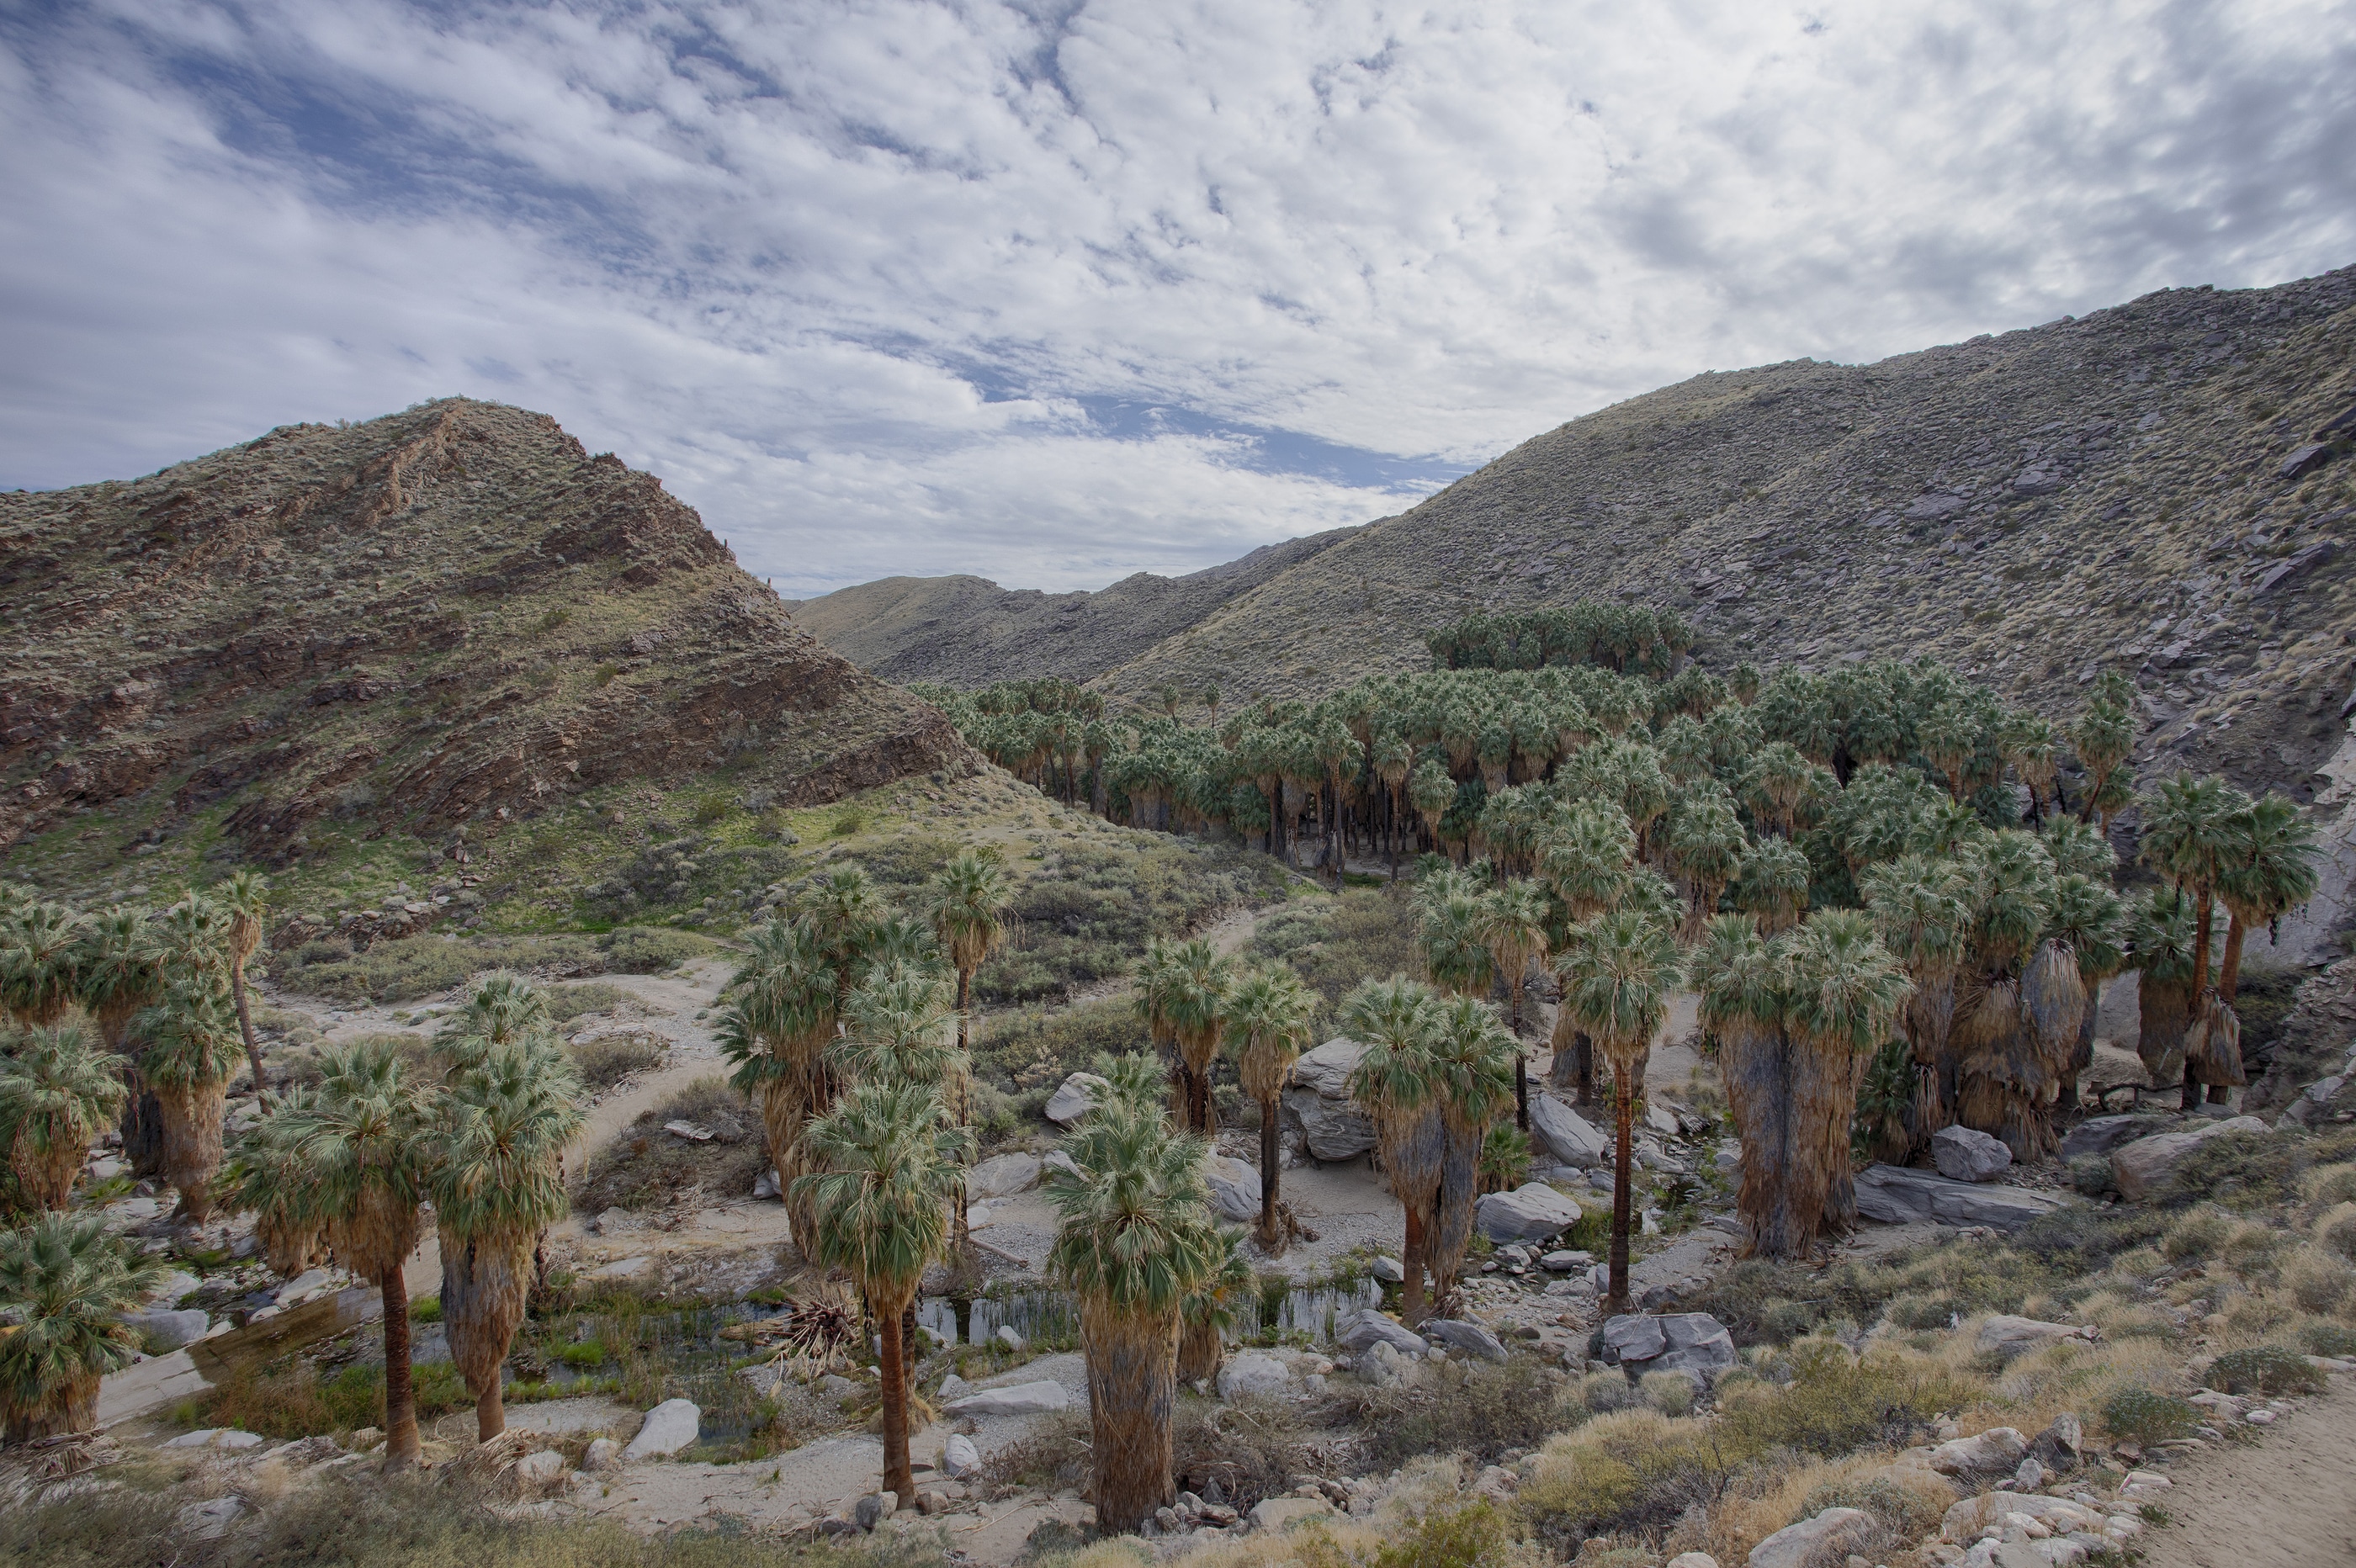 Indian Canyons is a great place to explore nature in Palm Springs.